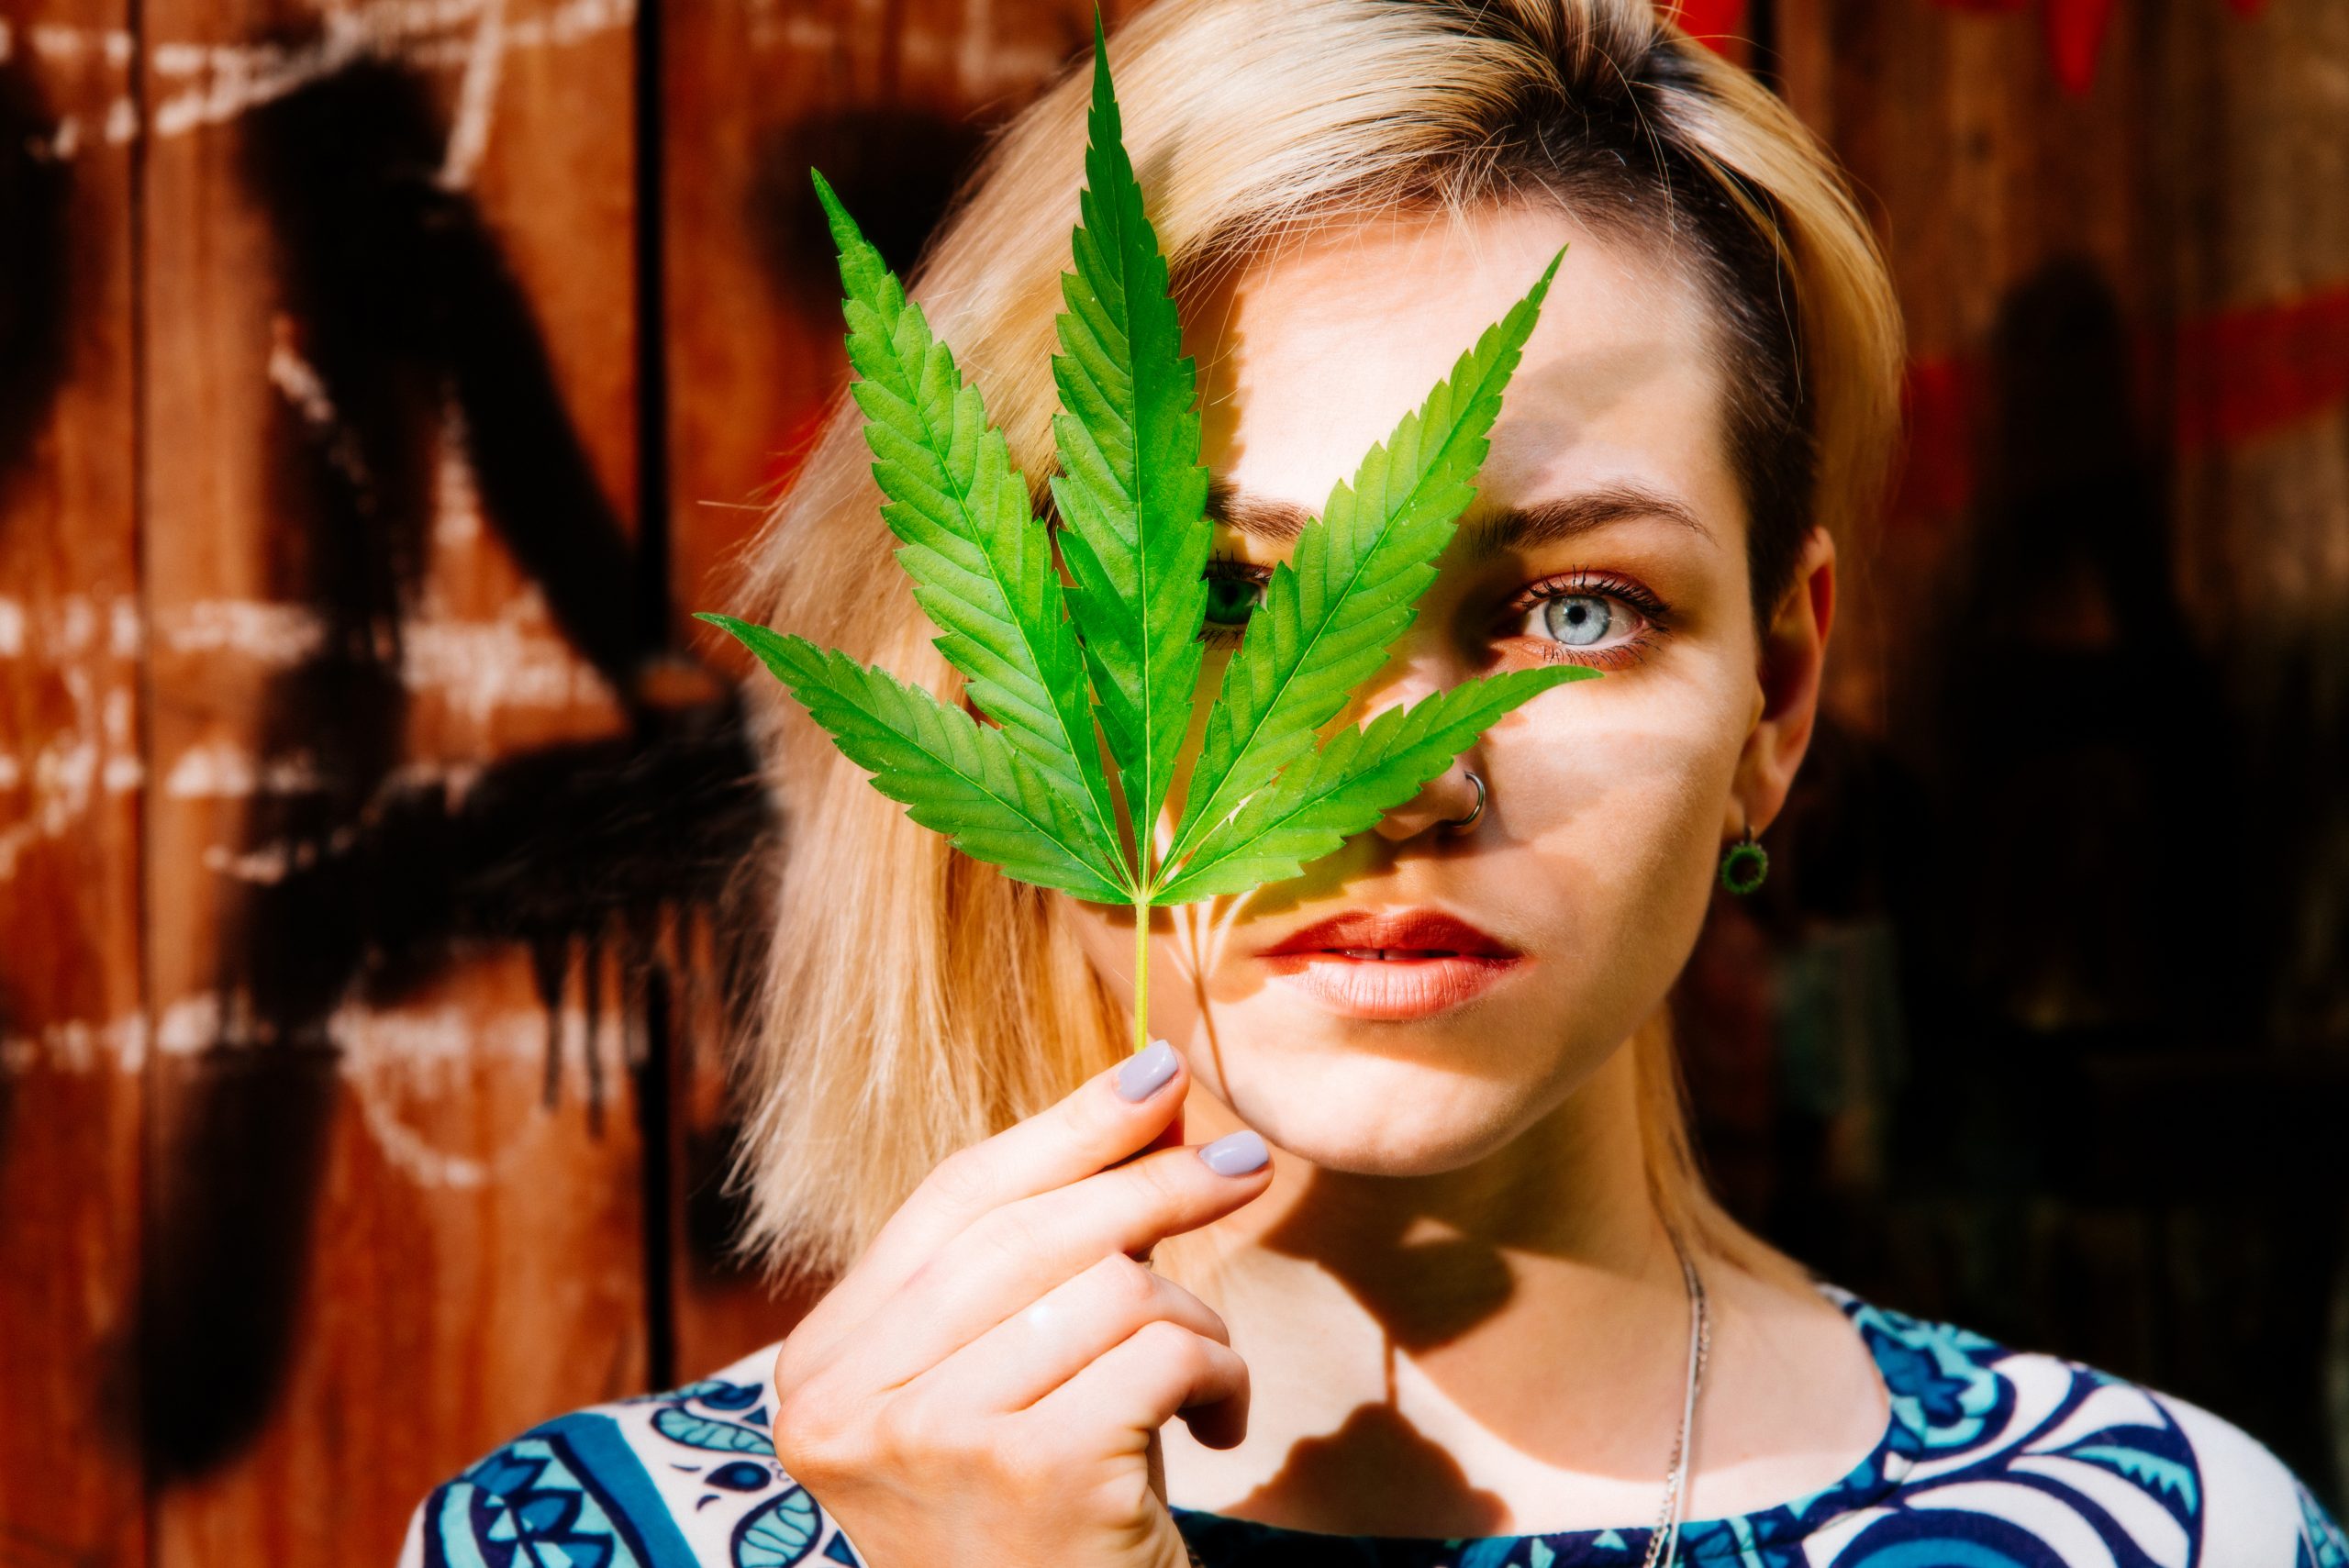 GIRL AND CANNABIS PLANT 164221597 1 scaled 1 | Productivity